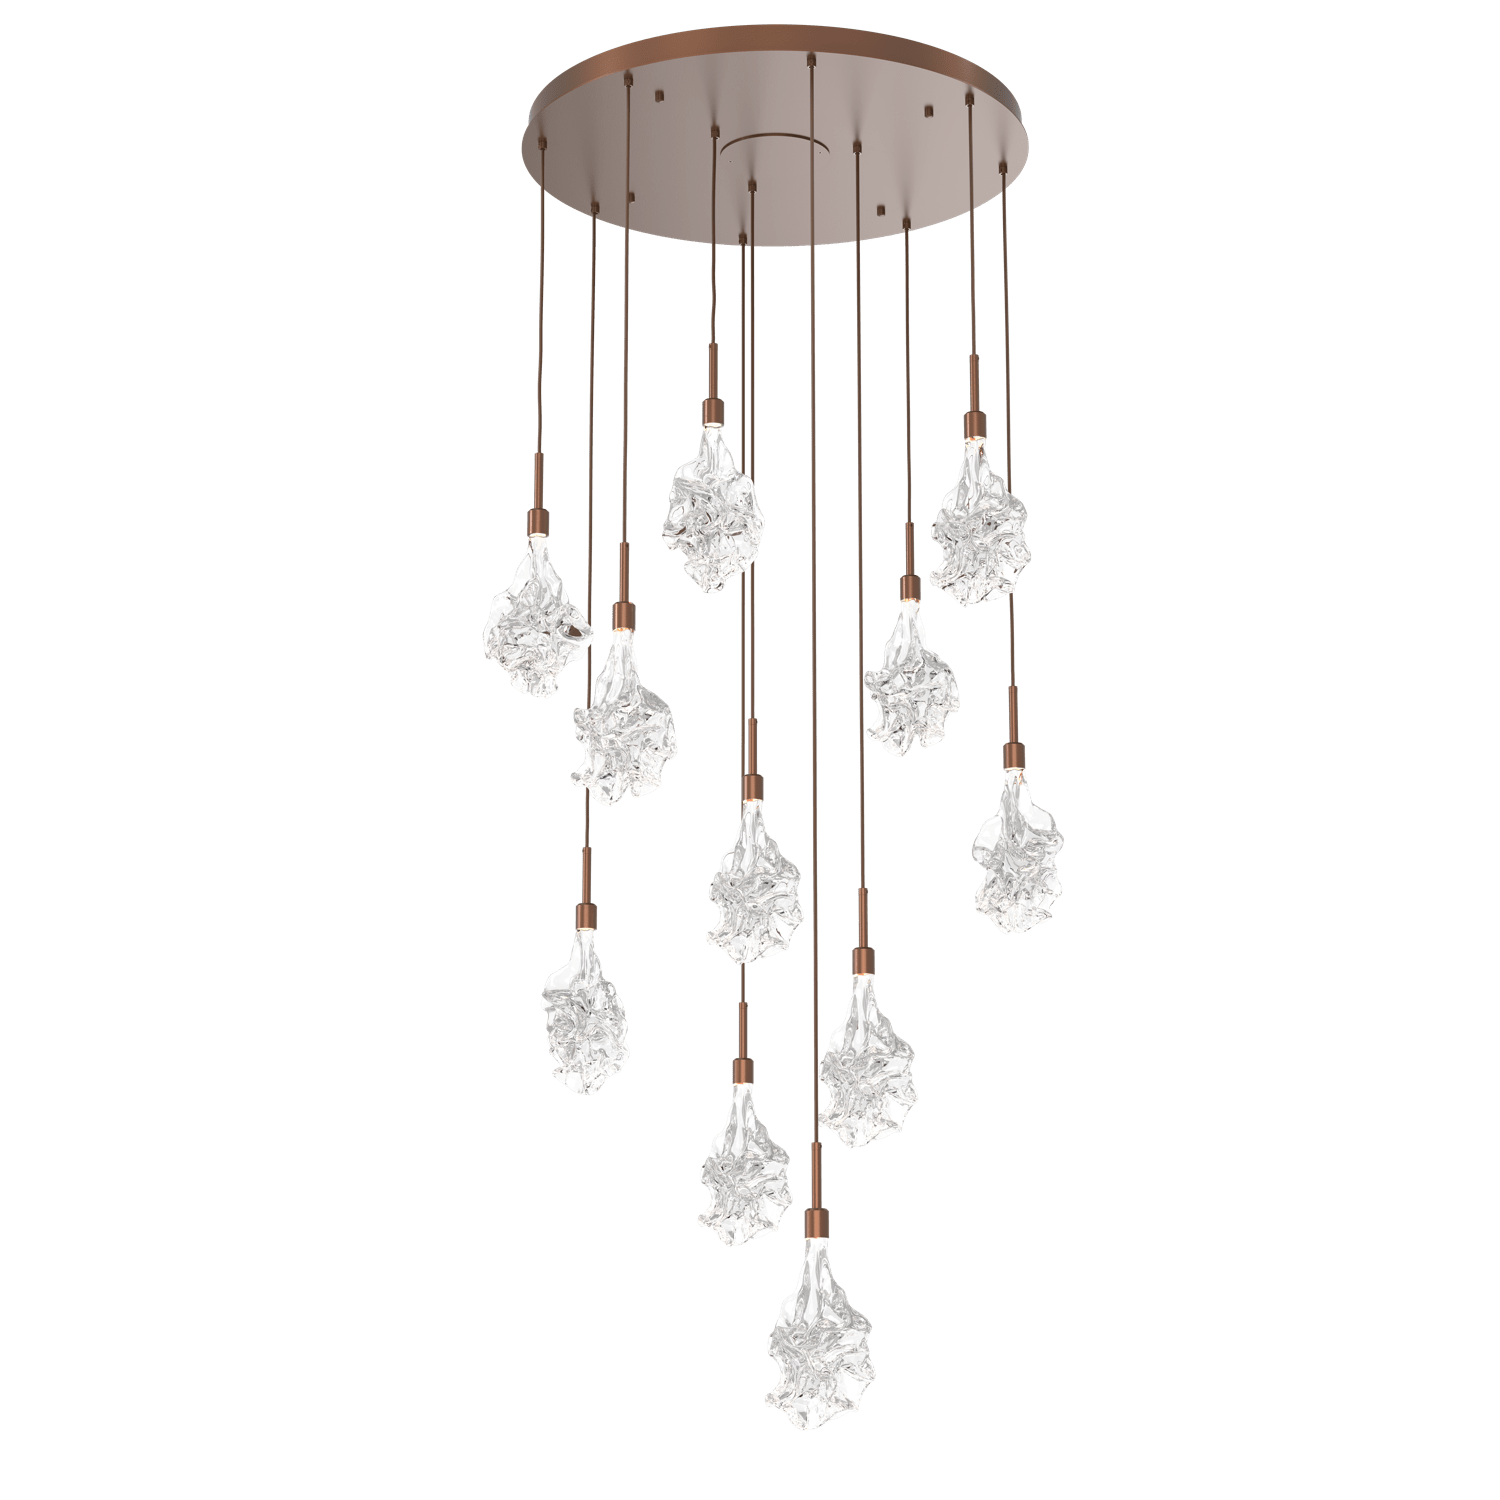 CHB0059-11-BB-Hammerton-Studio-Blossom-11-light-round-pendant-chandelier-with-burnished-bronze-finish-and-clear-handblown-crystal-glass-shades-and-LED-lamping